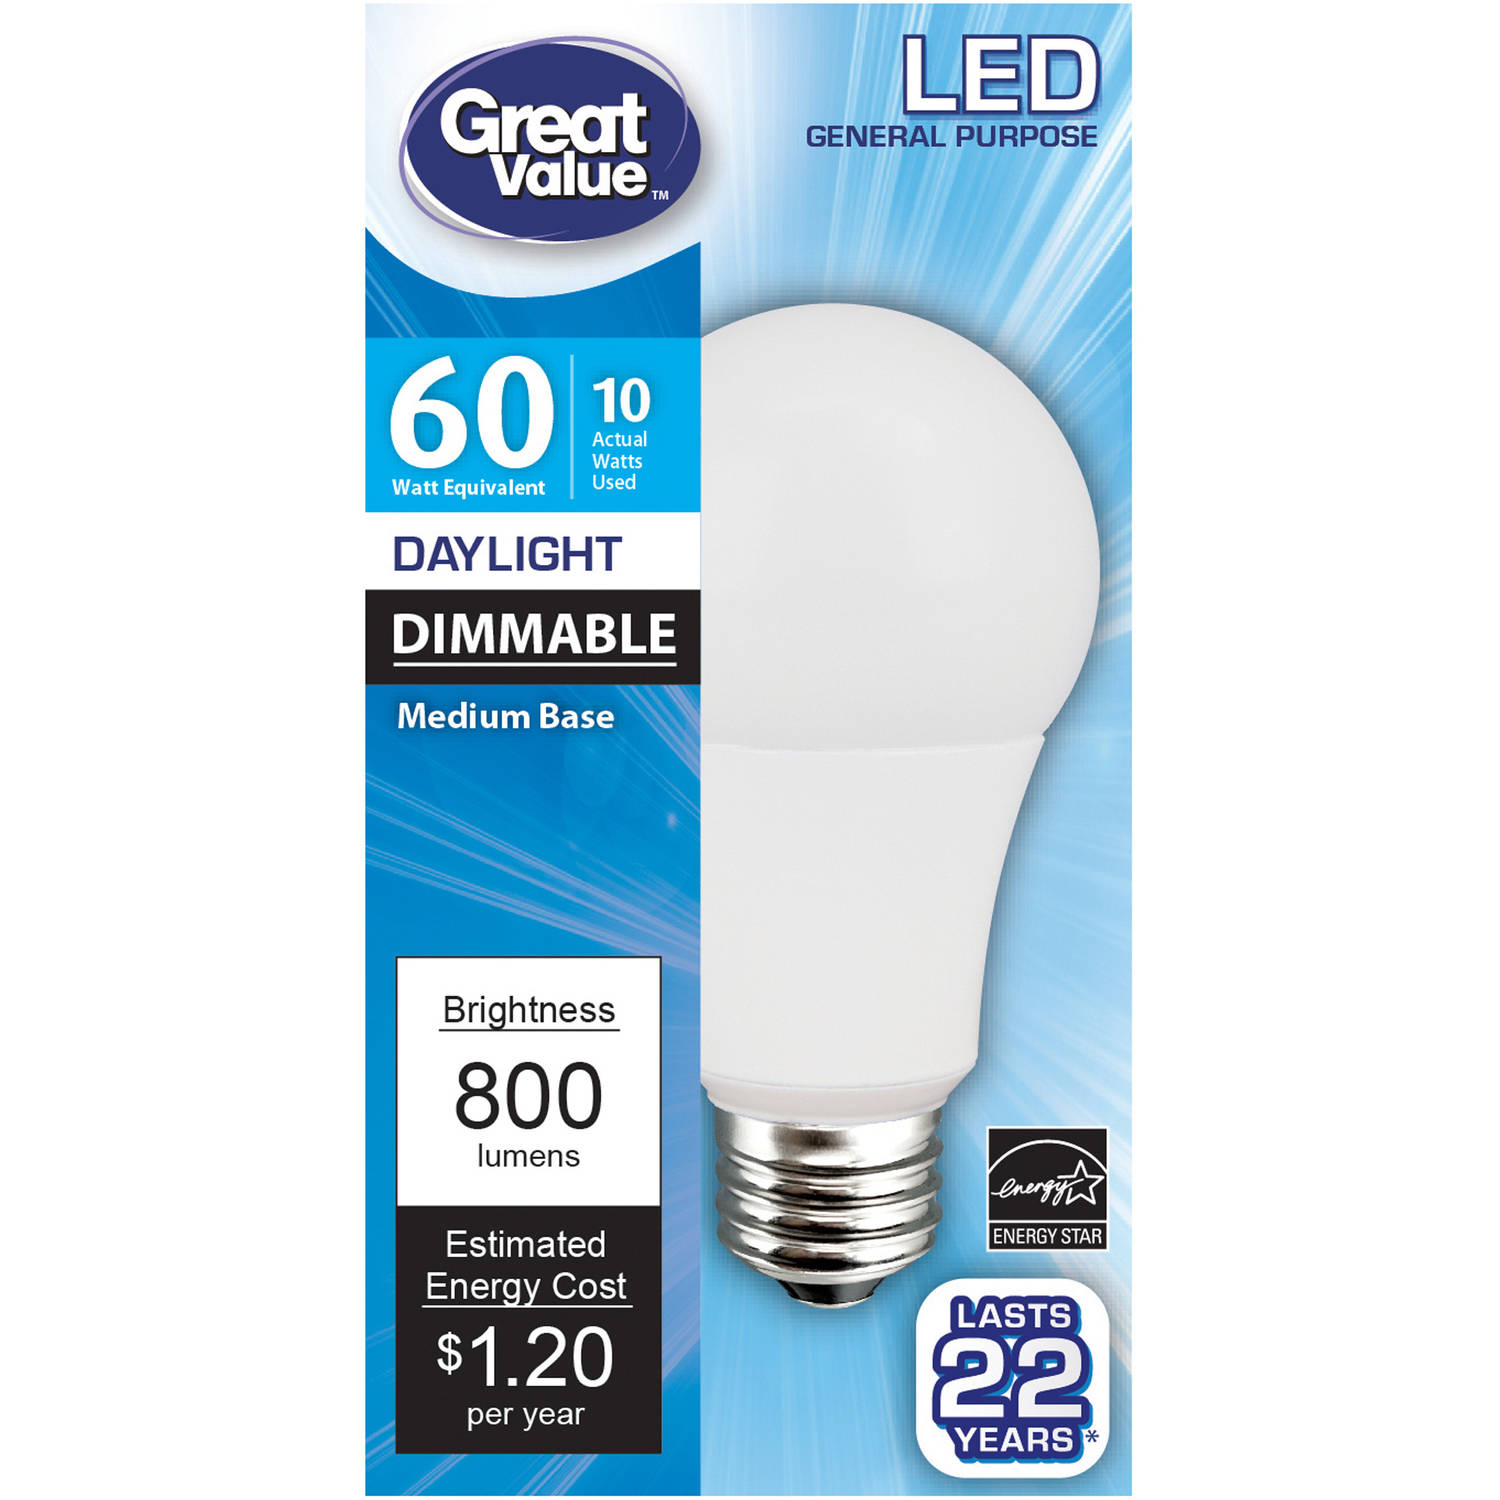 Great Value LED Light Bulb, 10W (60W Equivalent) A19 Lamp E26 Medium Base, Dimmable, Daylight - image 1 of 6